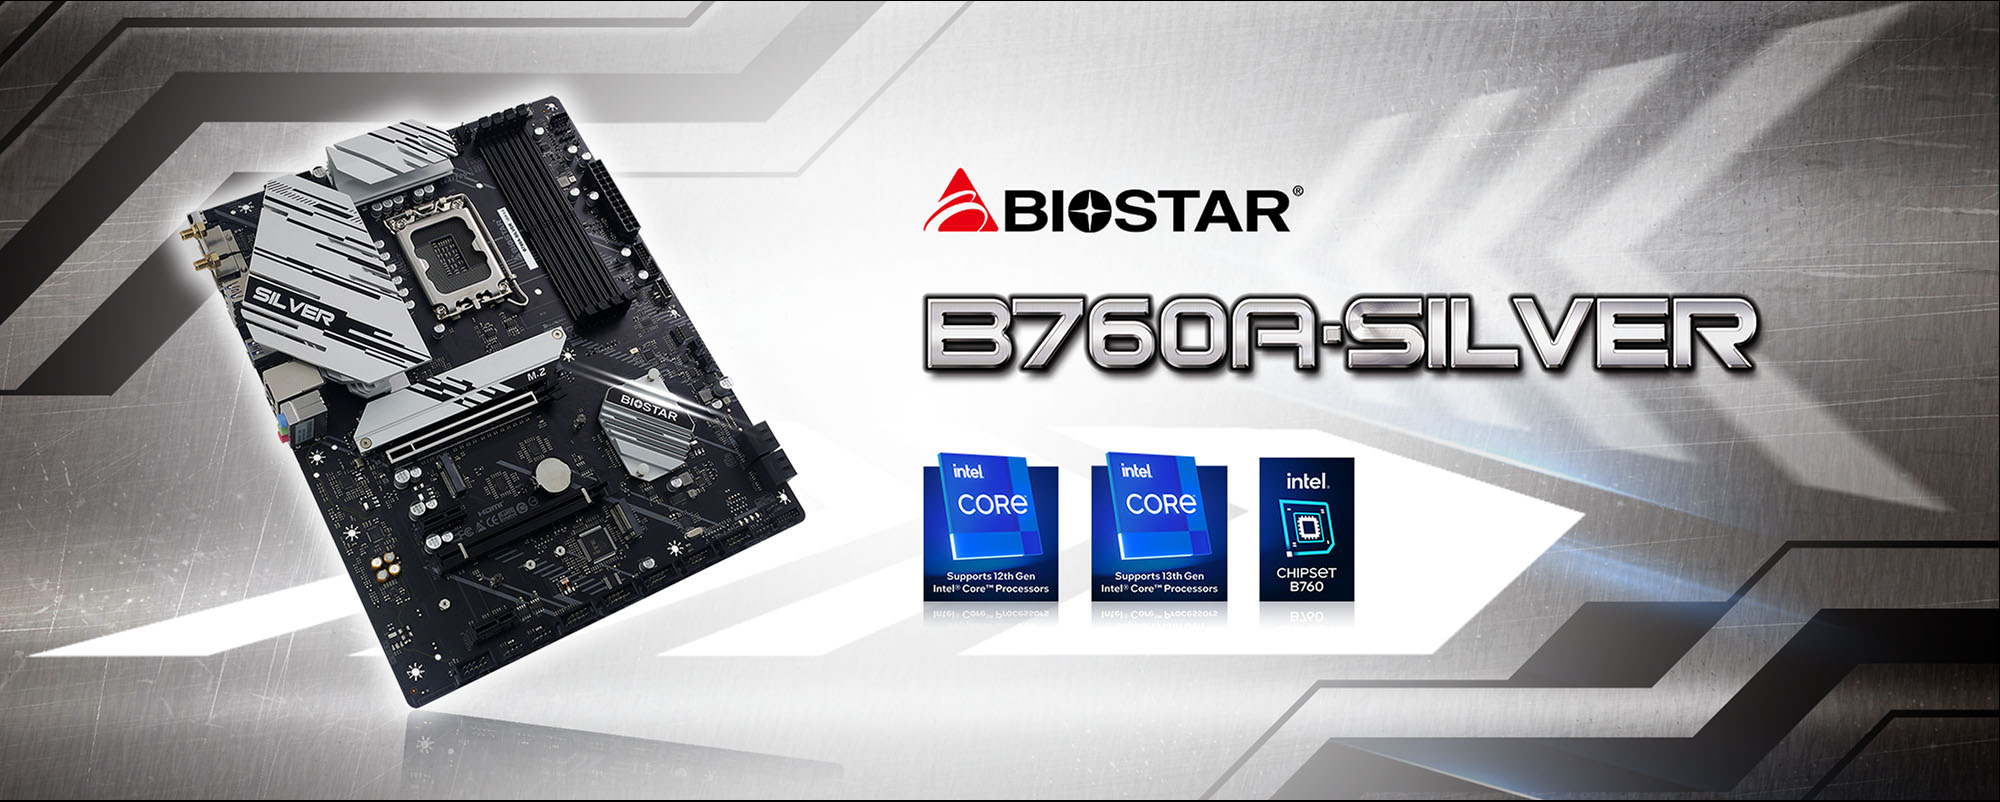 Biostar presents the new Silver Series motherboards for Intel Core i7-14700K processors